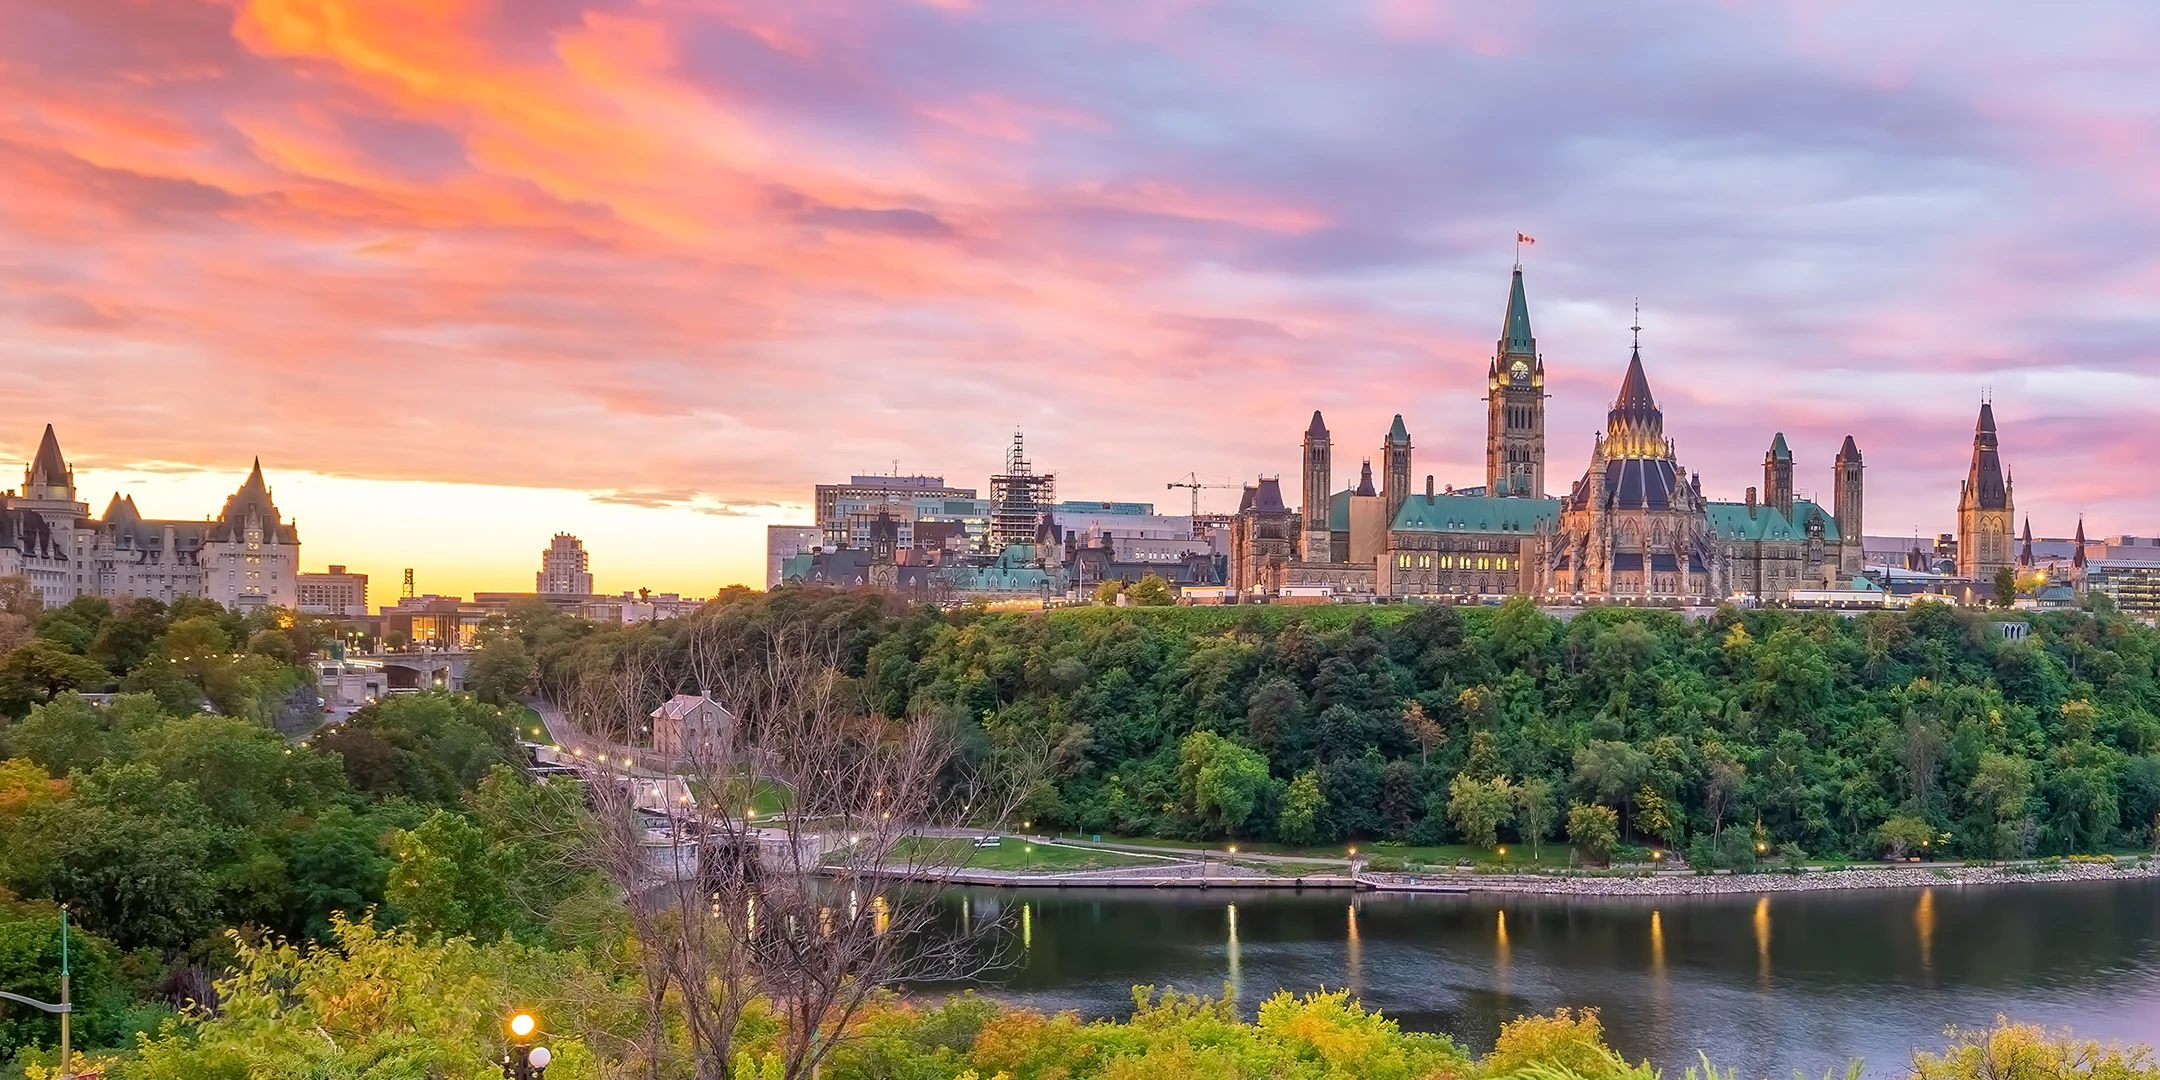 Parliament Hill in Ottawa Ontario Canada at Sunset.